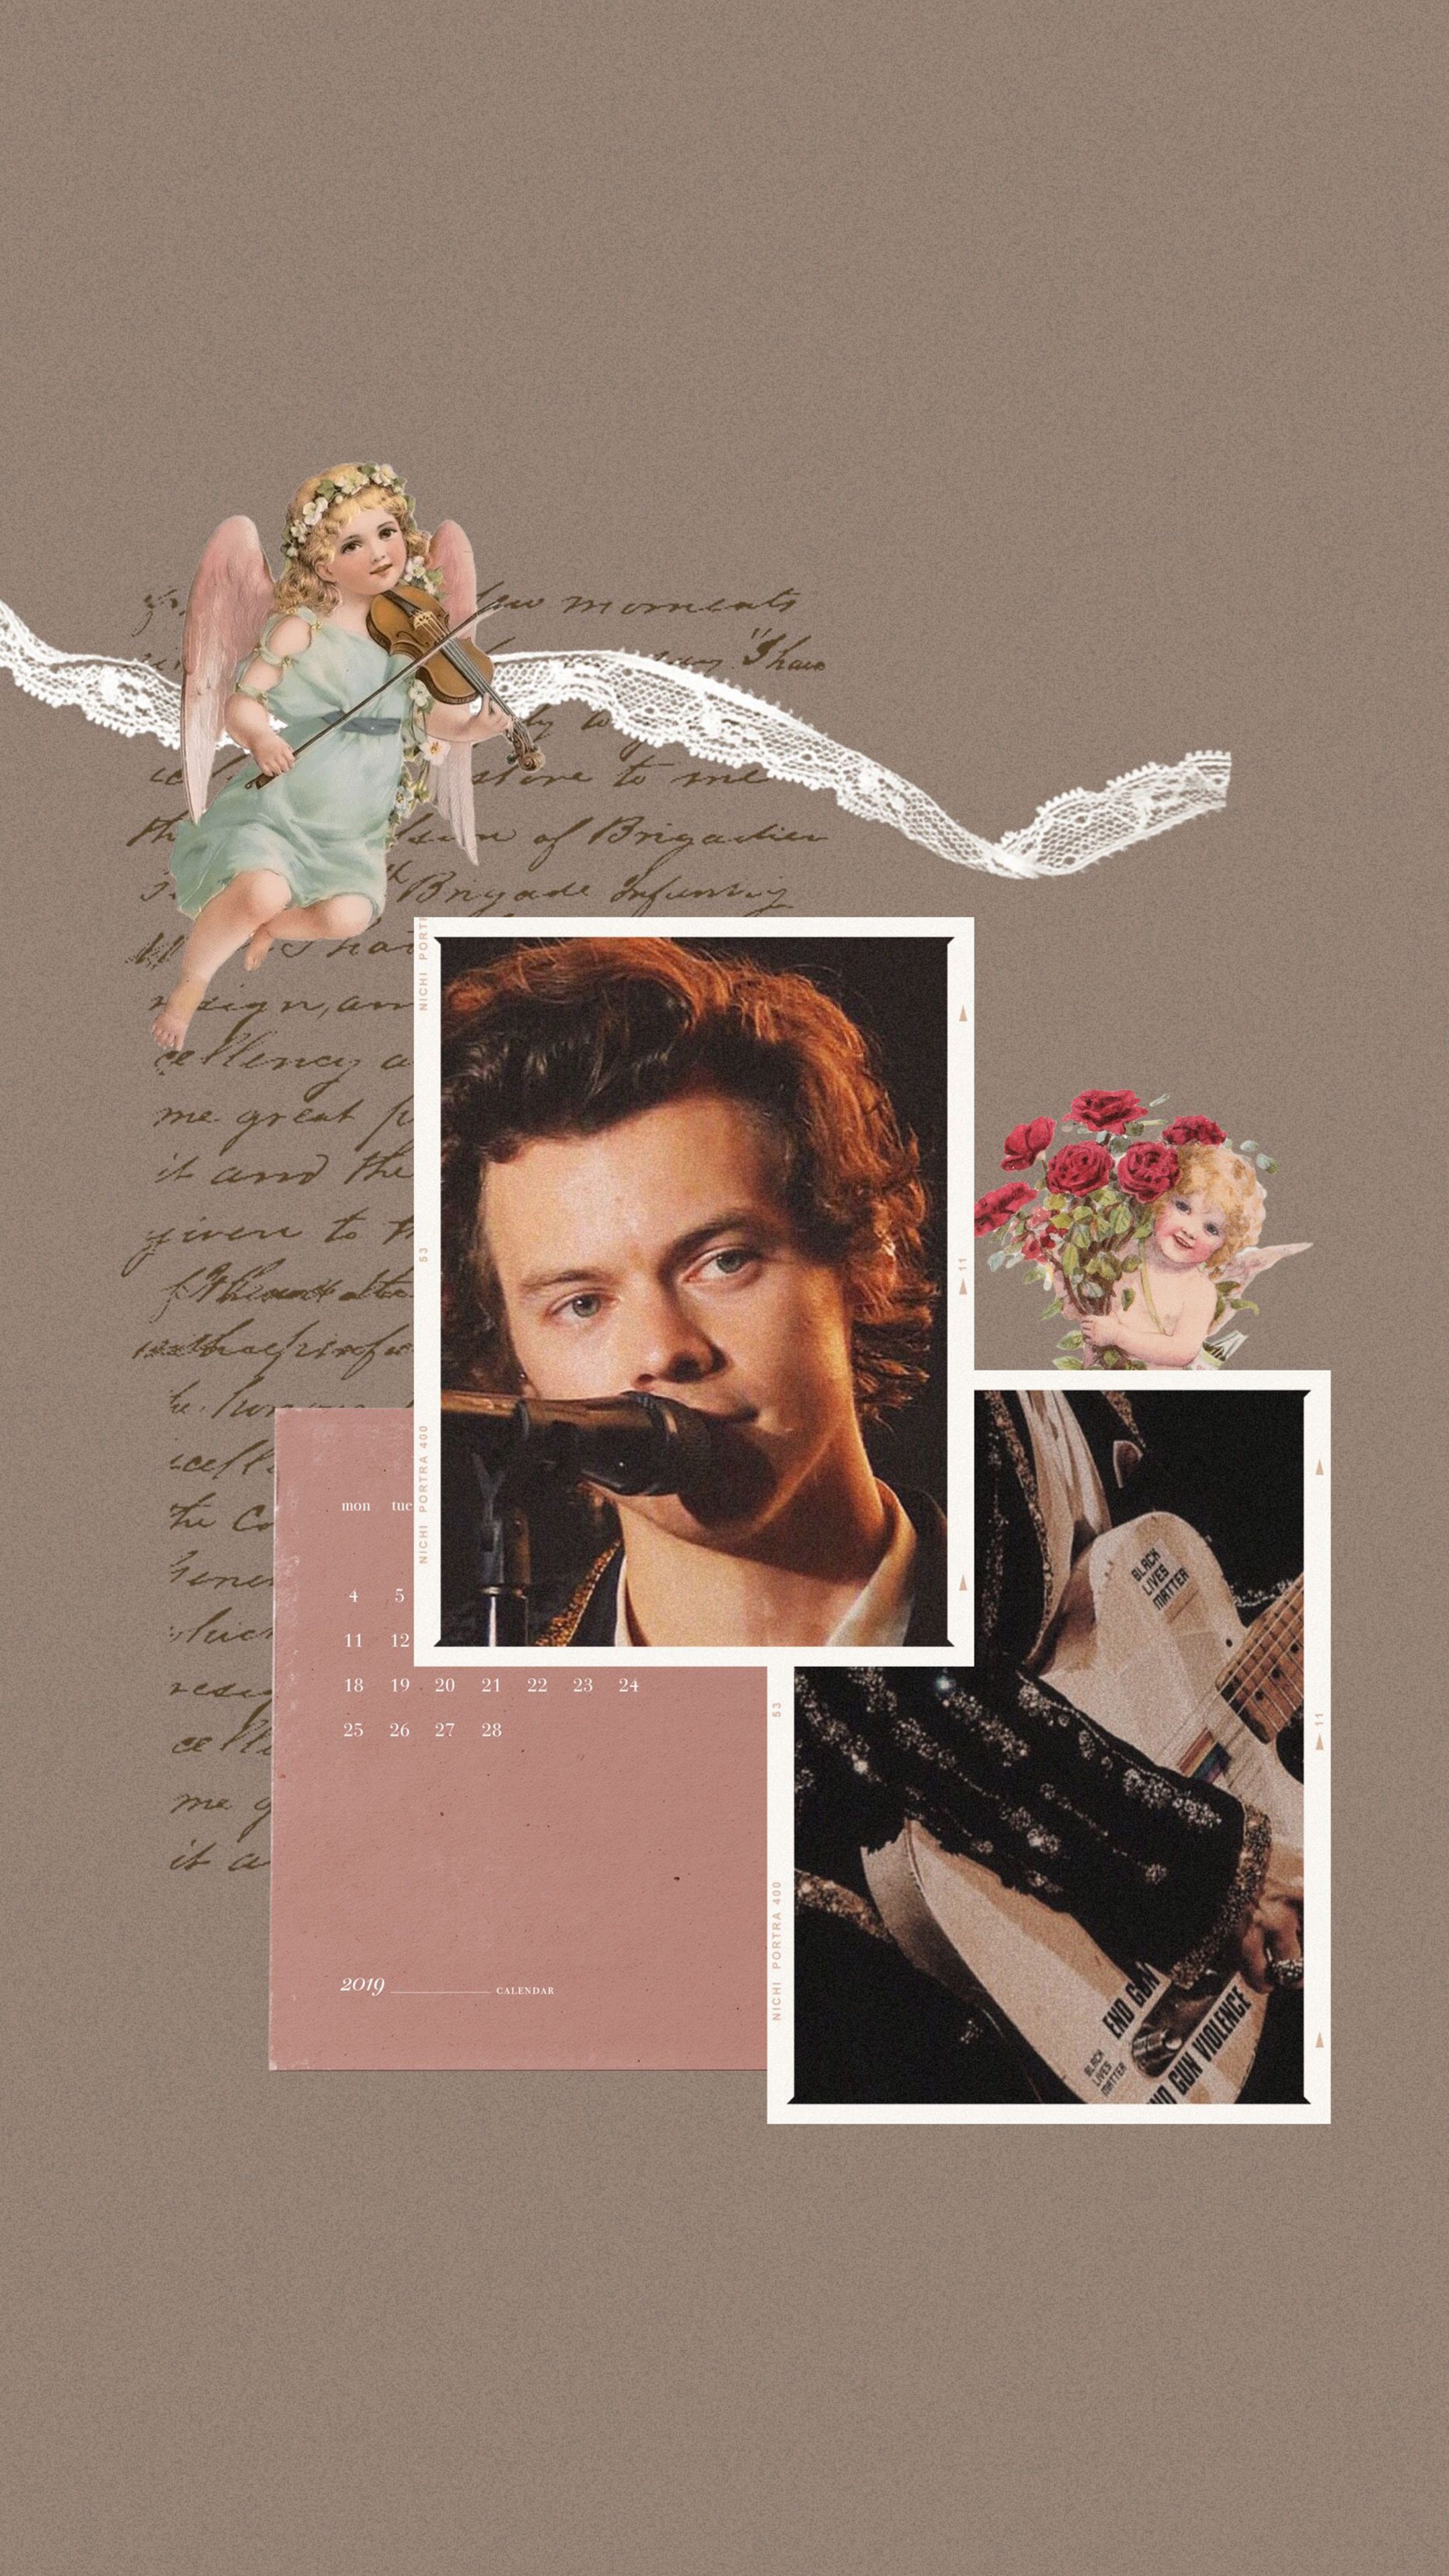 A collage of Harry Styles, a flower, a cupcake, and an angel. - Harry Styles